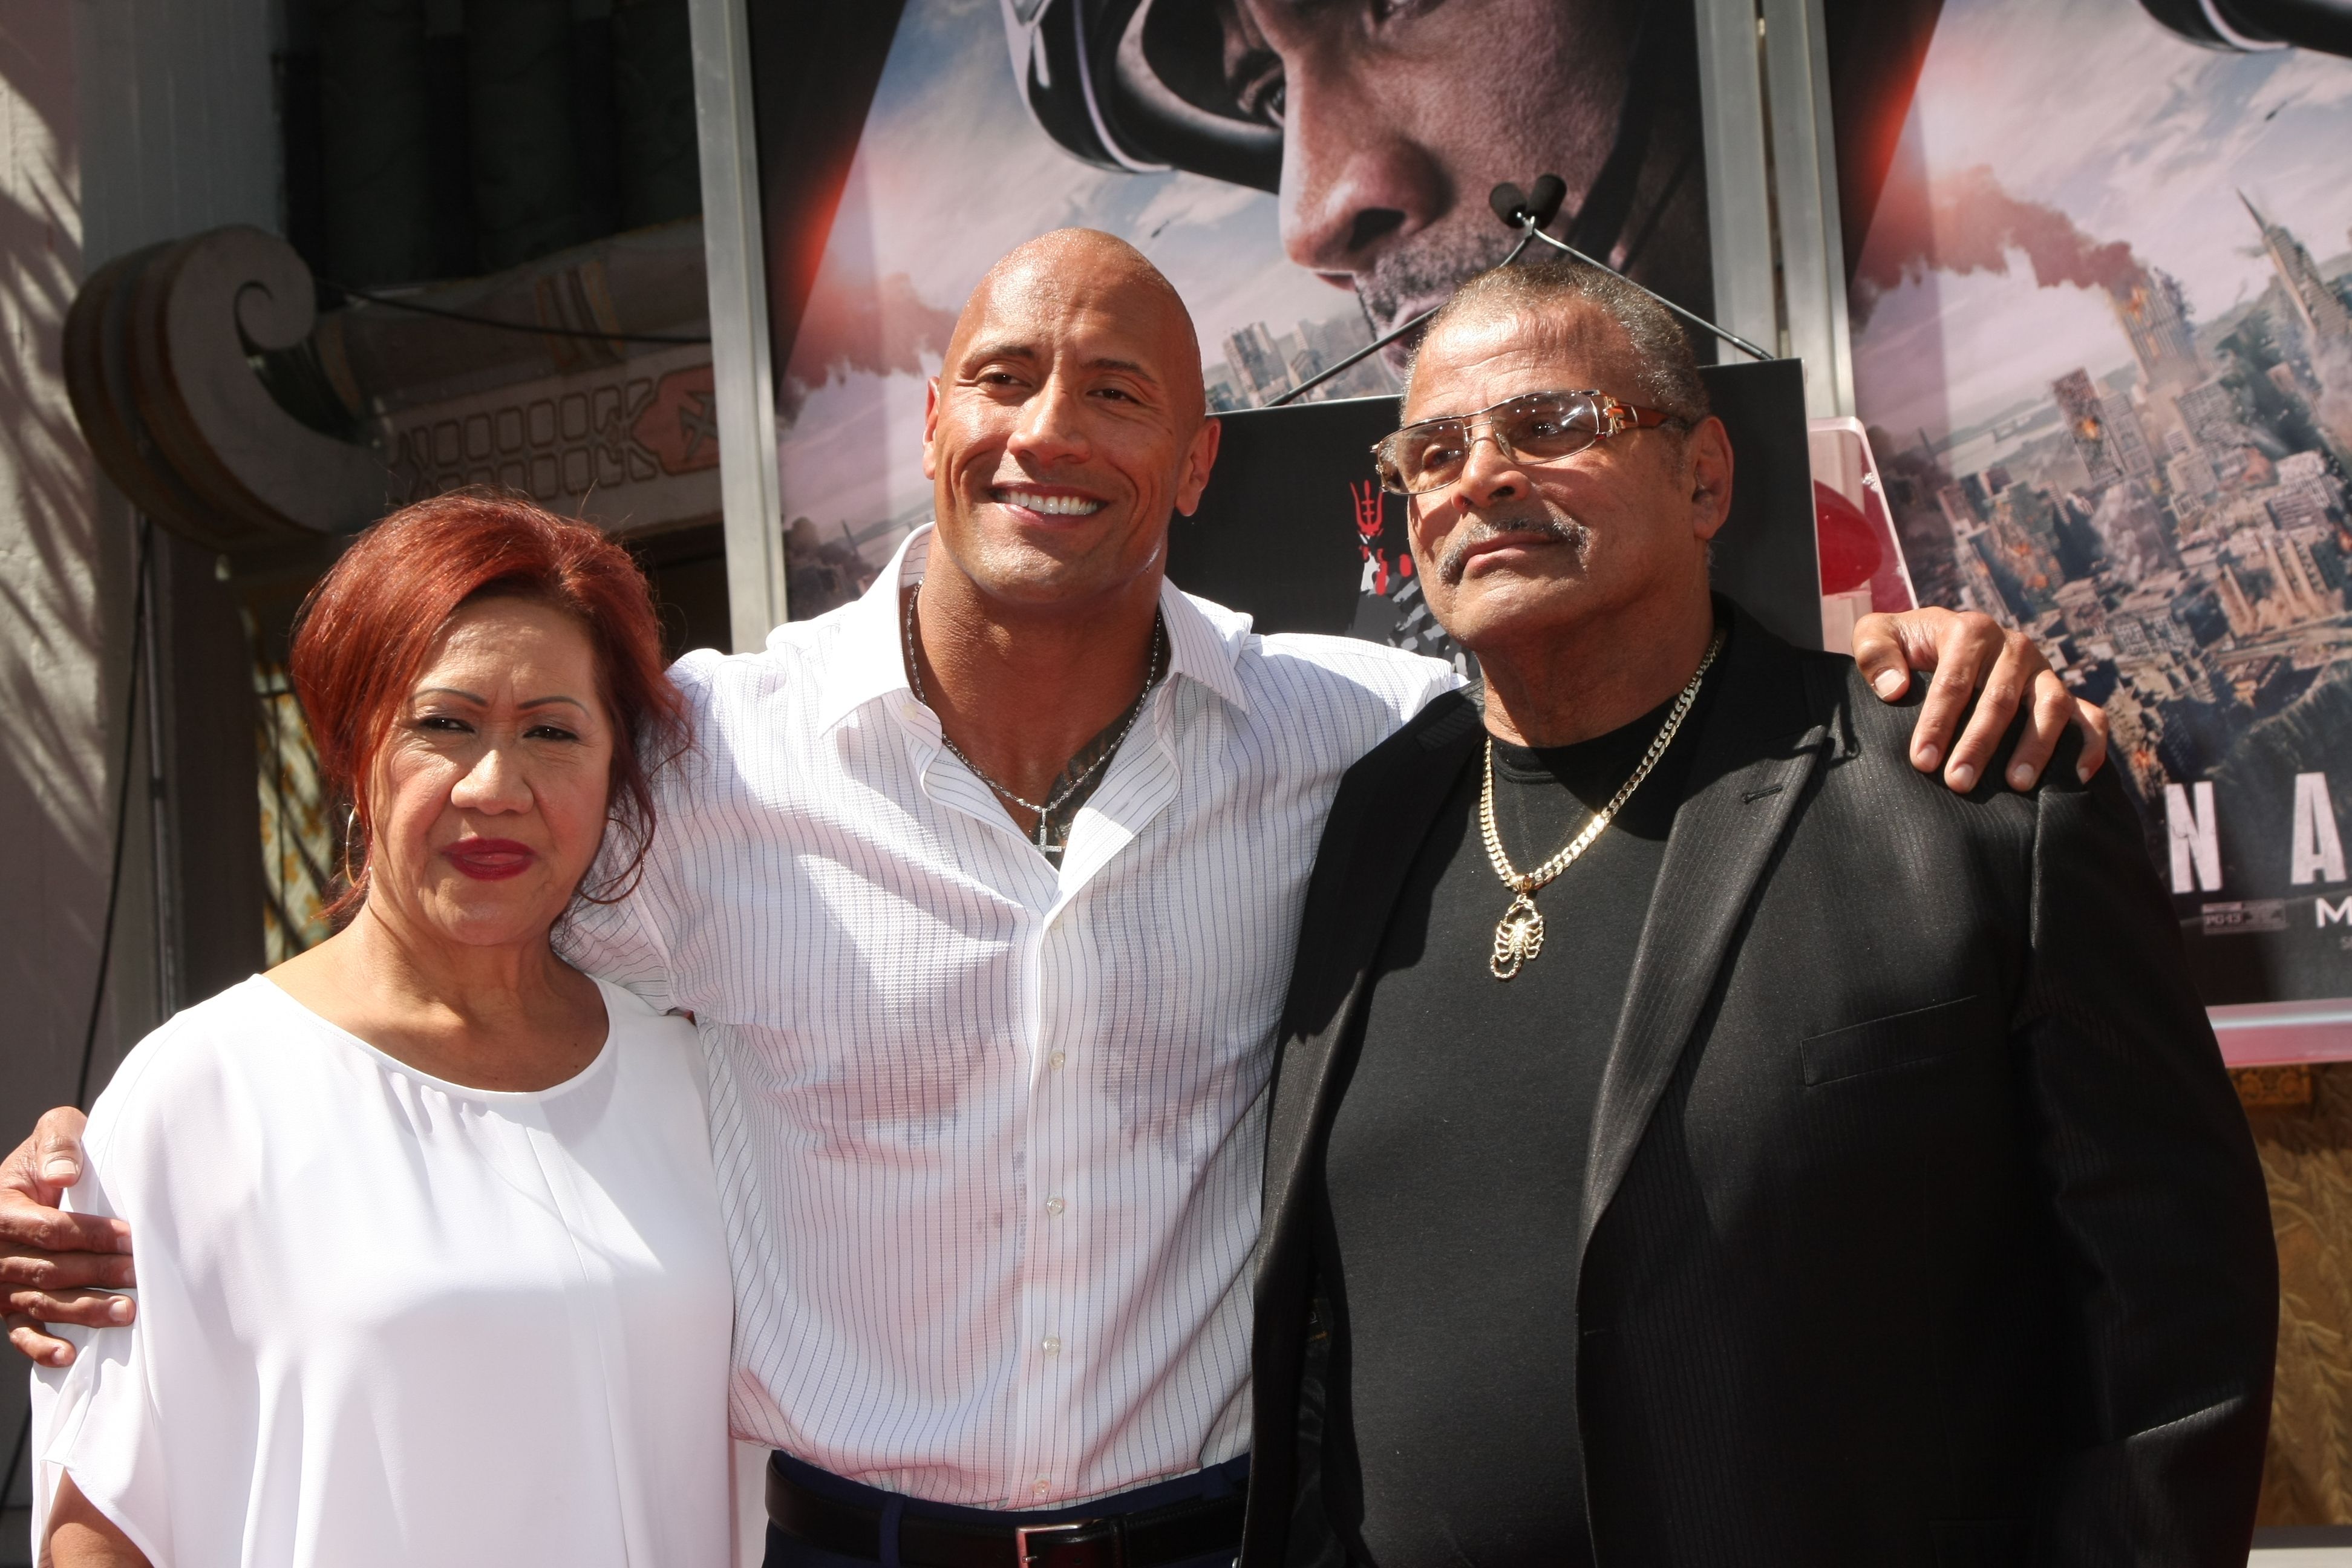 Ata, Dwayne "The Rock," and Rocky "The Soul Man" Johnson at the Hand and Footprint Ceremony on May 19, 2015, in Hollywood, California | Photo: Shutterstock